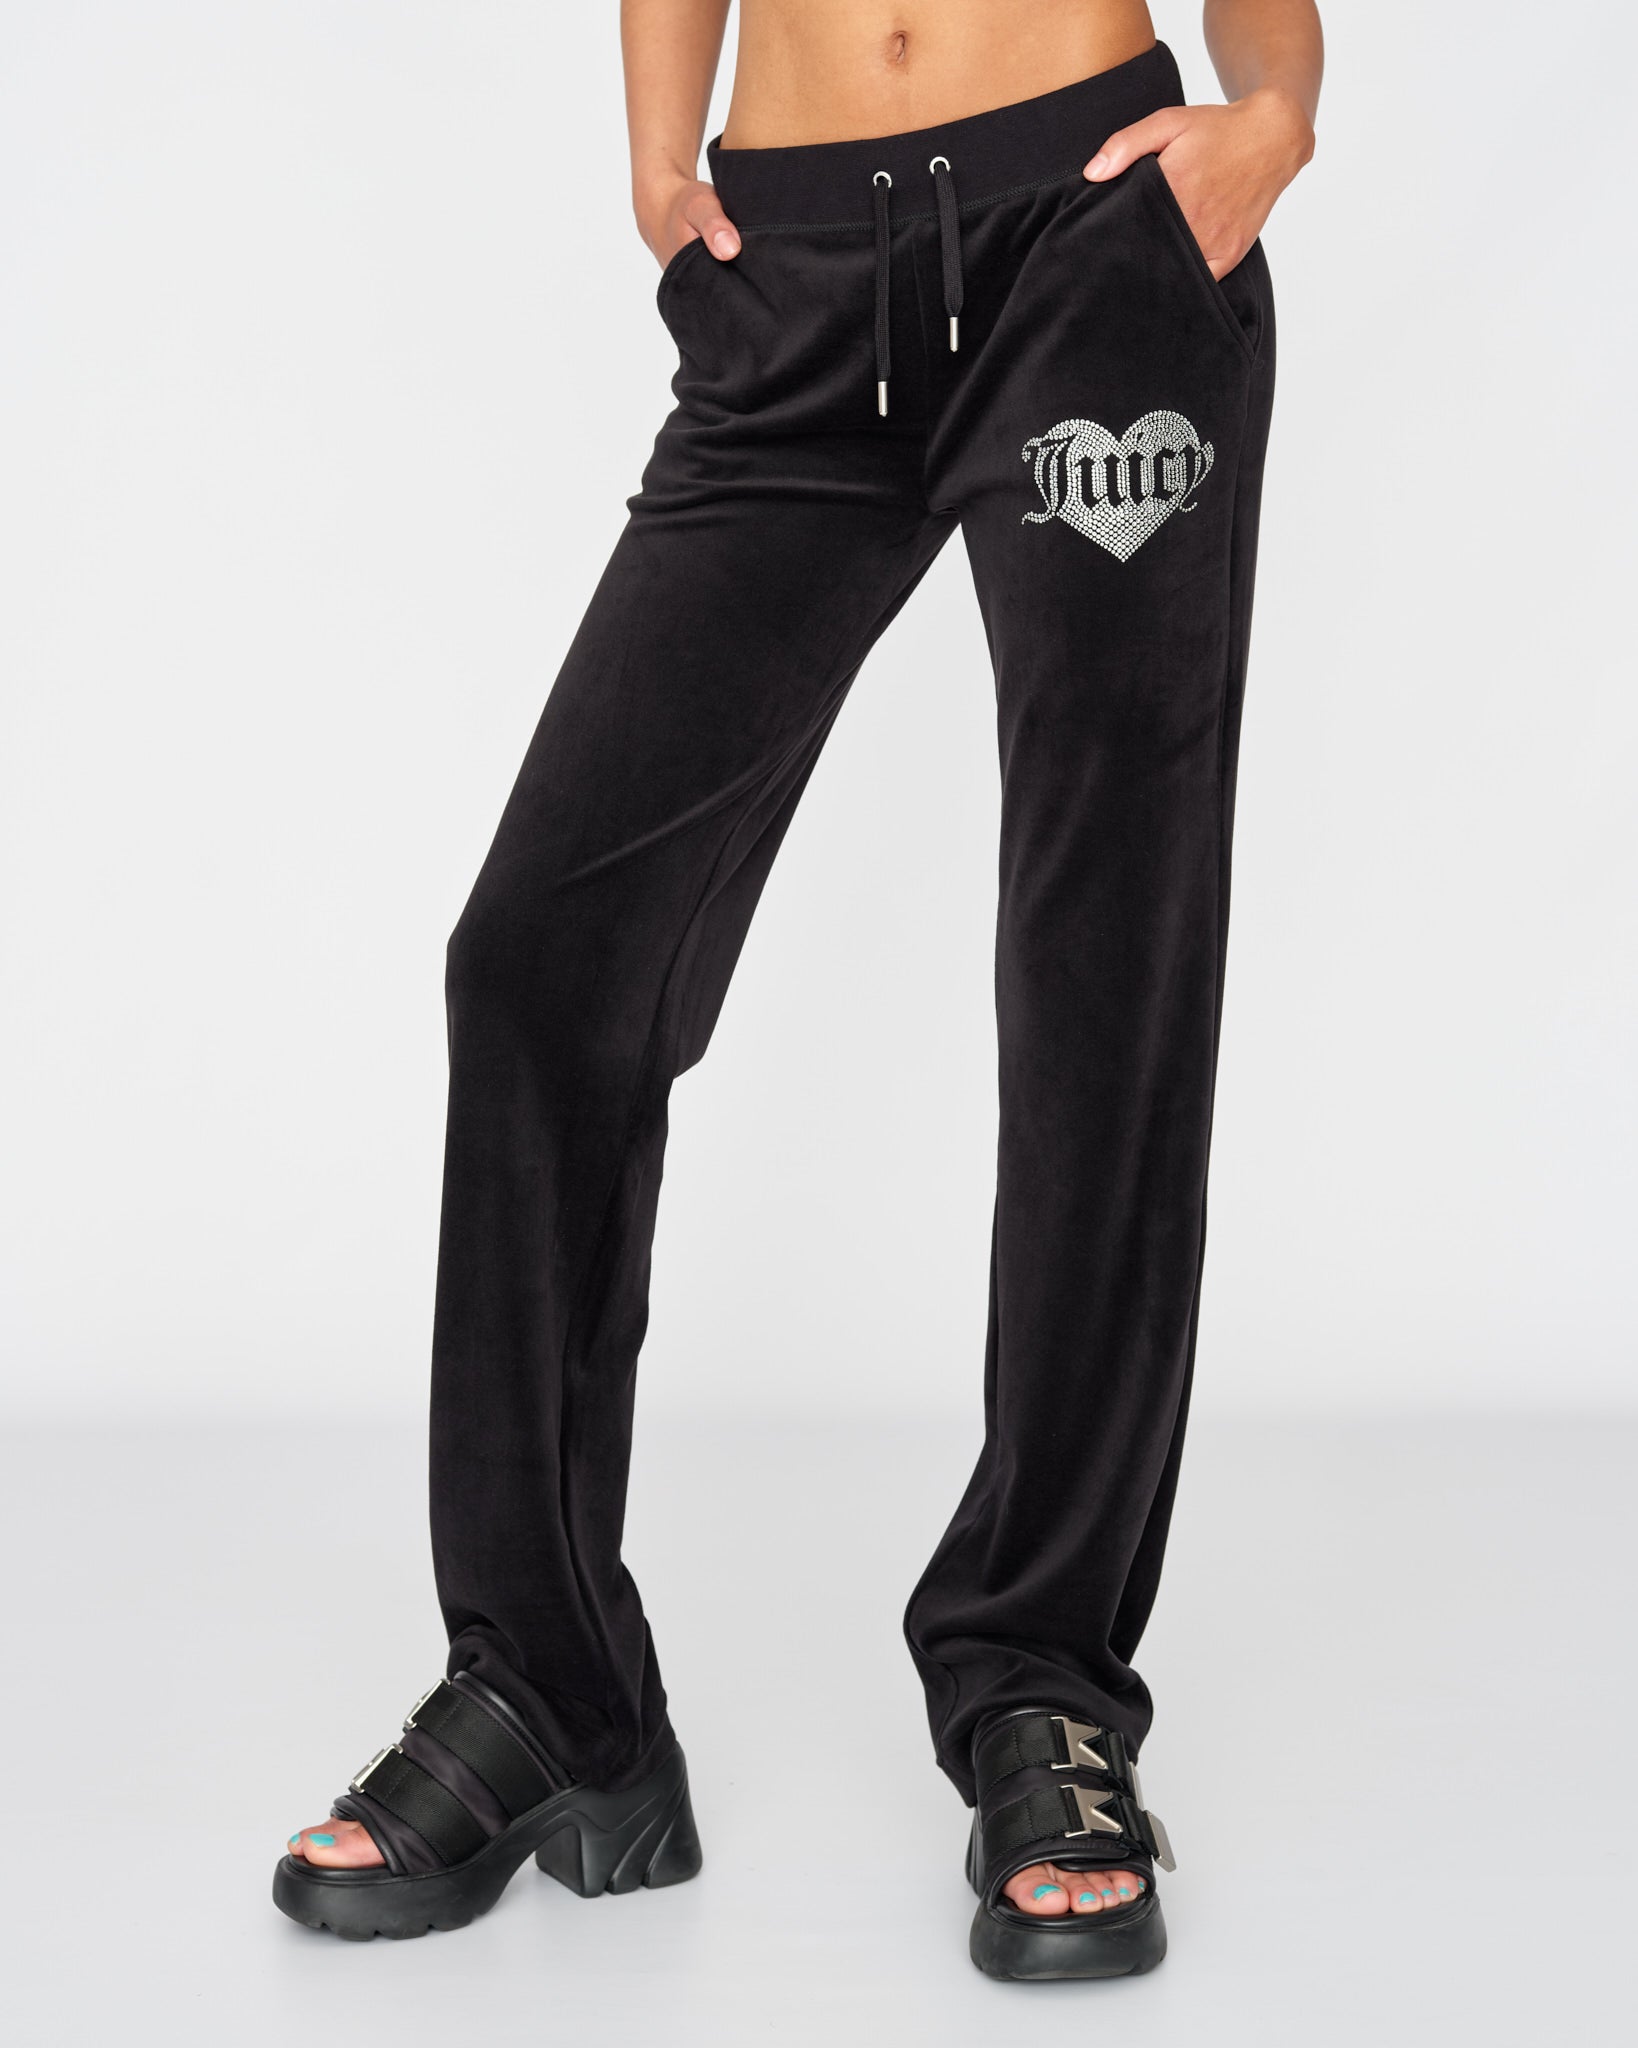 Juicy Couture - Girls Black Cotton Joggers